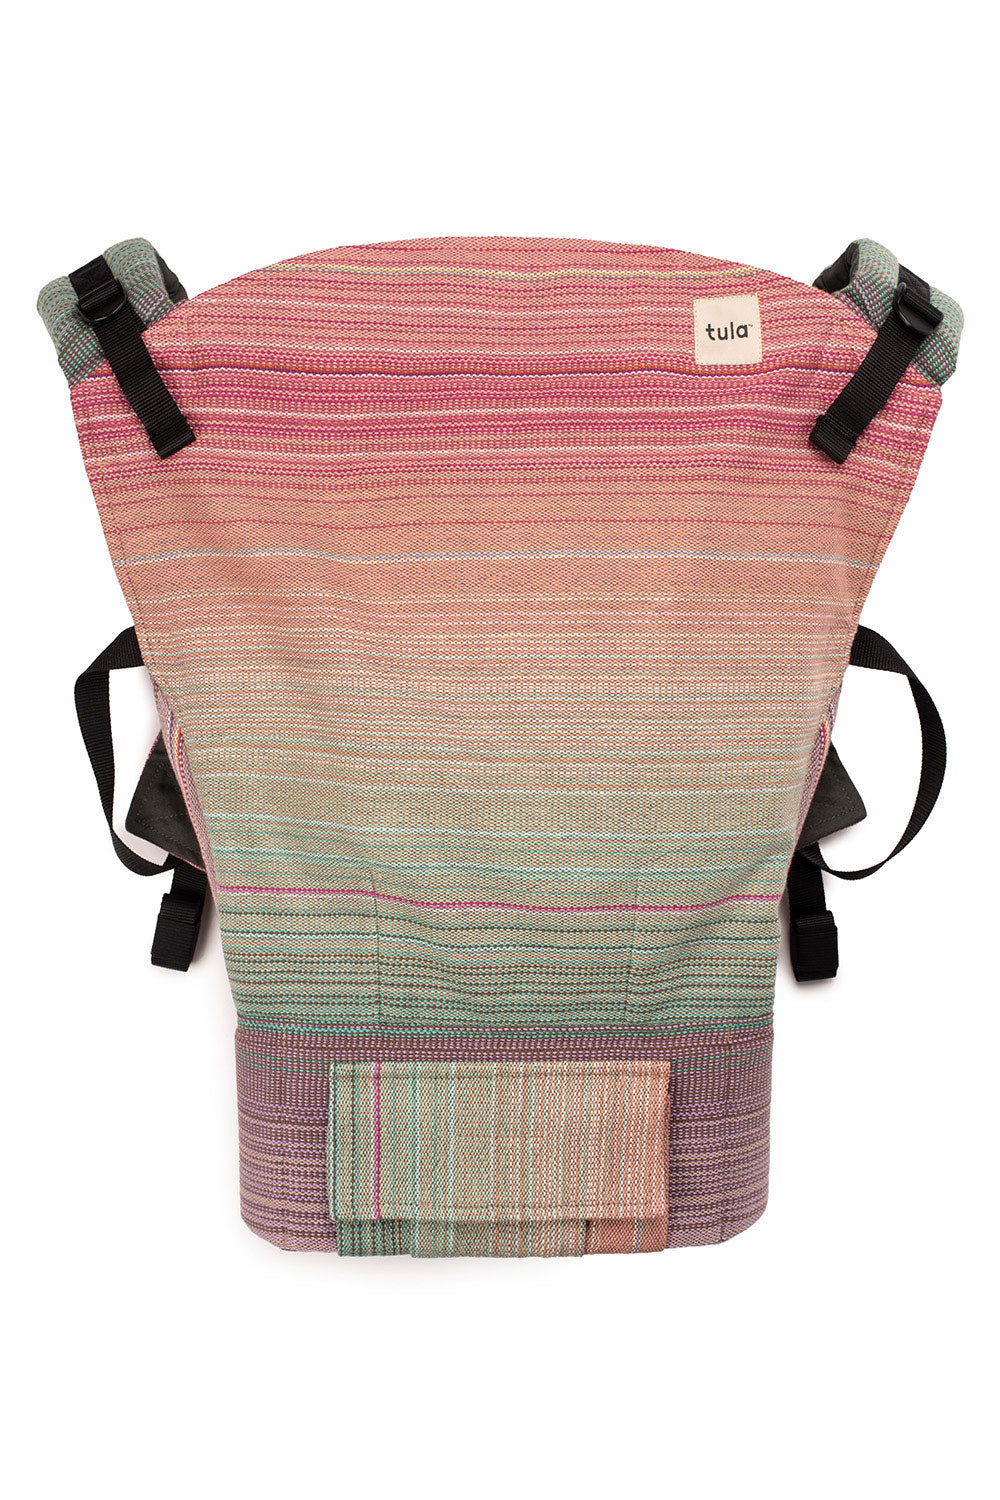 Starry Eyes - Signature Woven Toddler Carrier